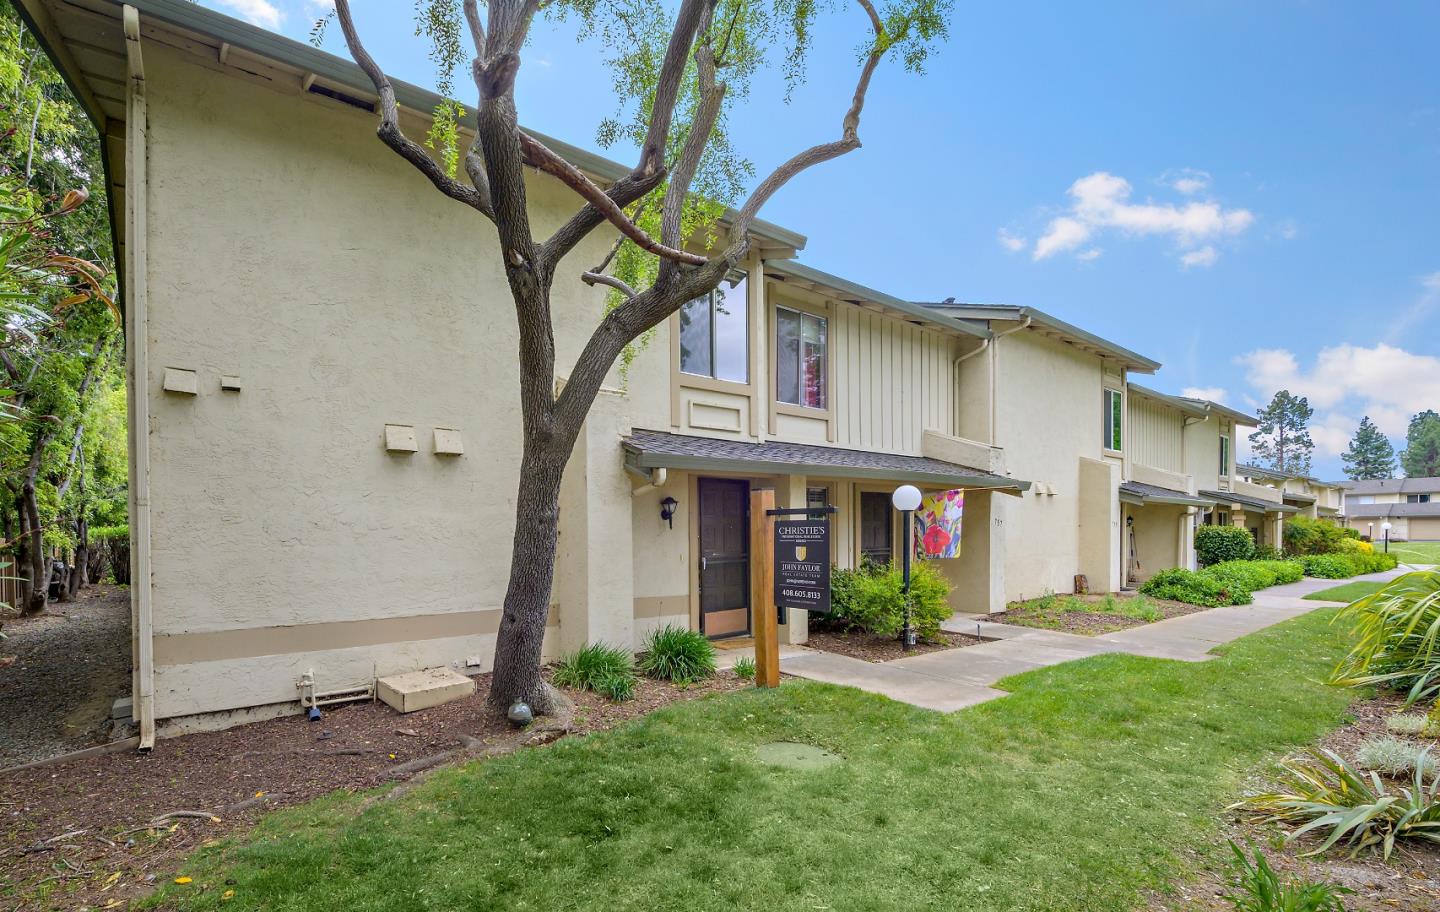 Photo of 759 Winstead Ter in Sunnyvale, CA